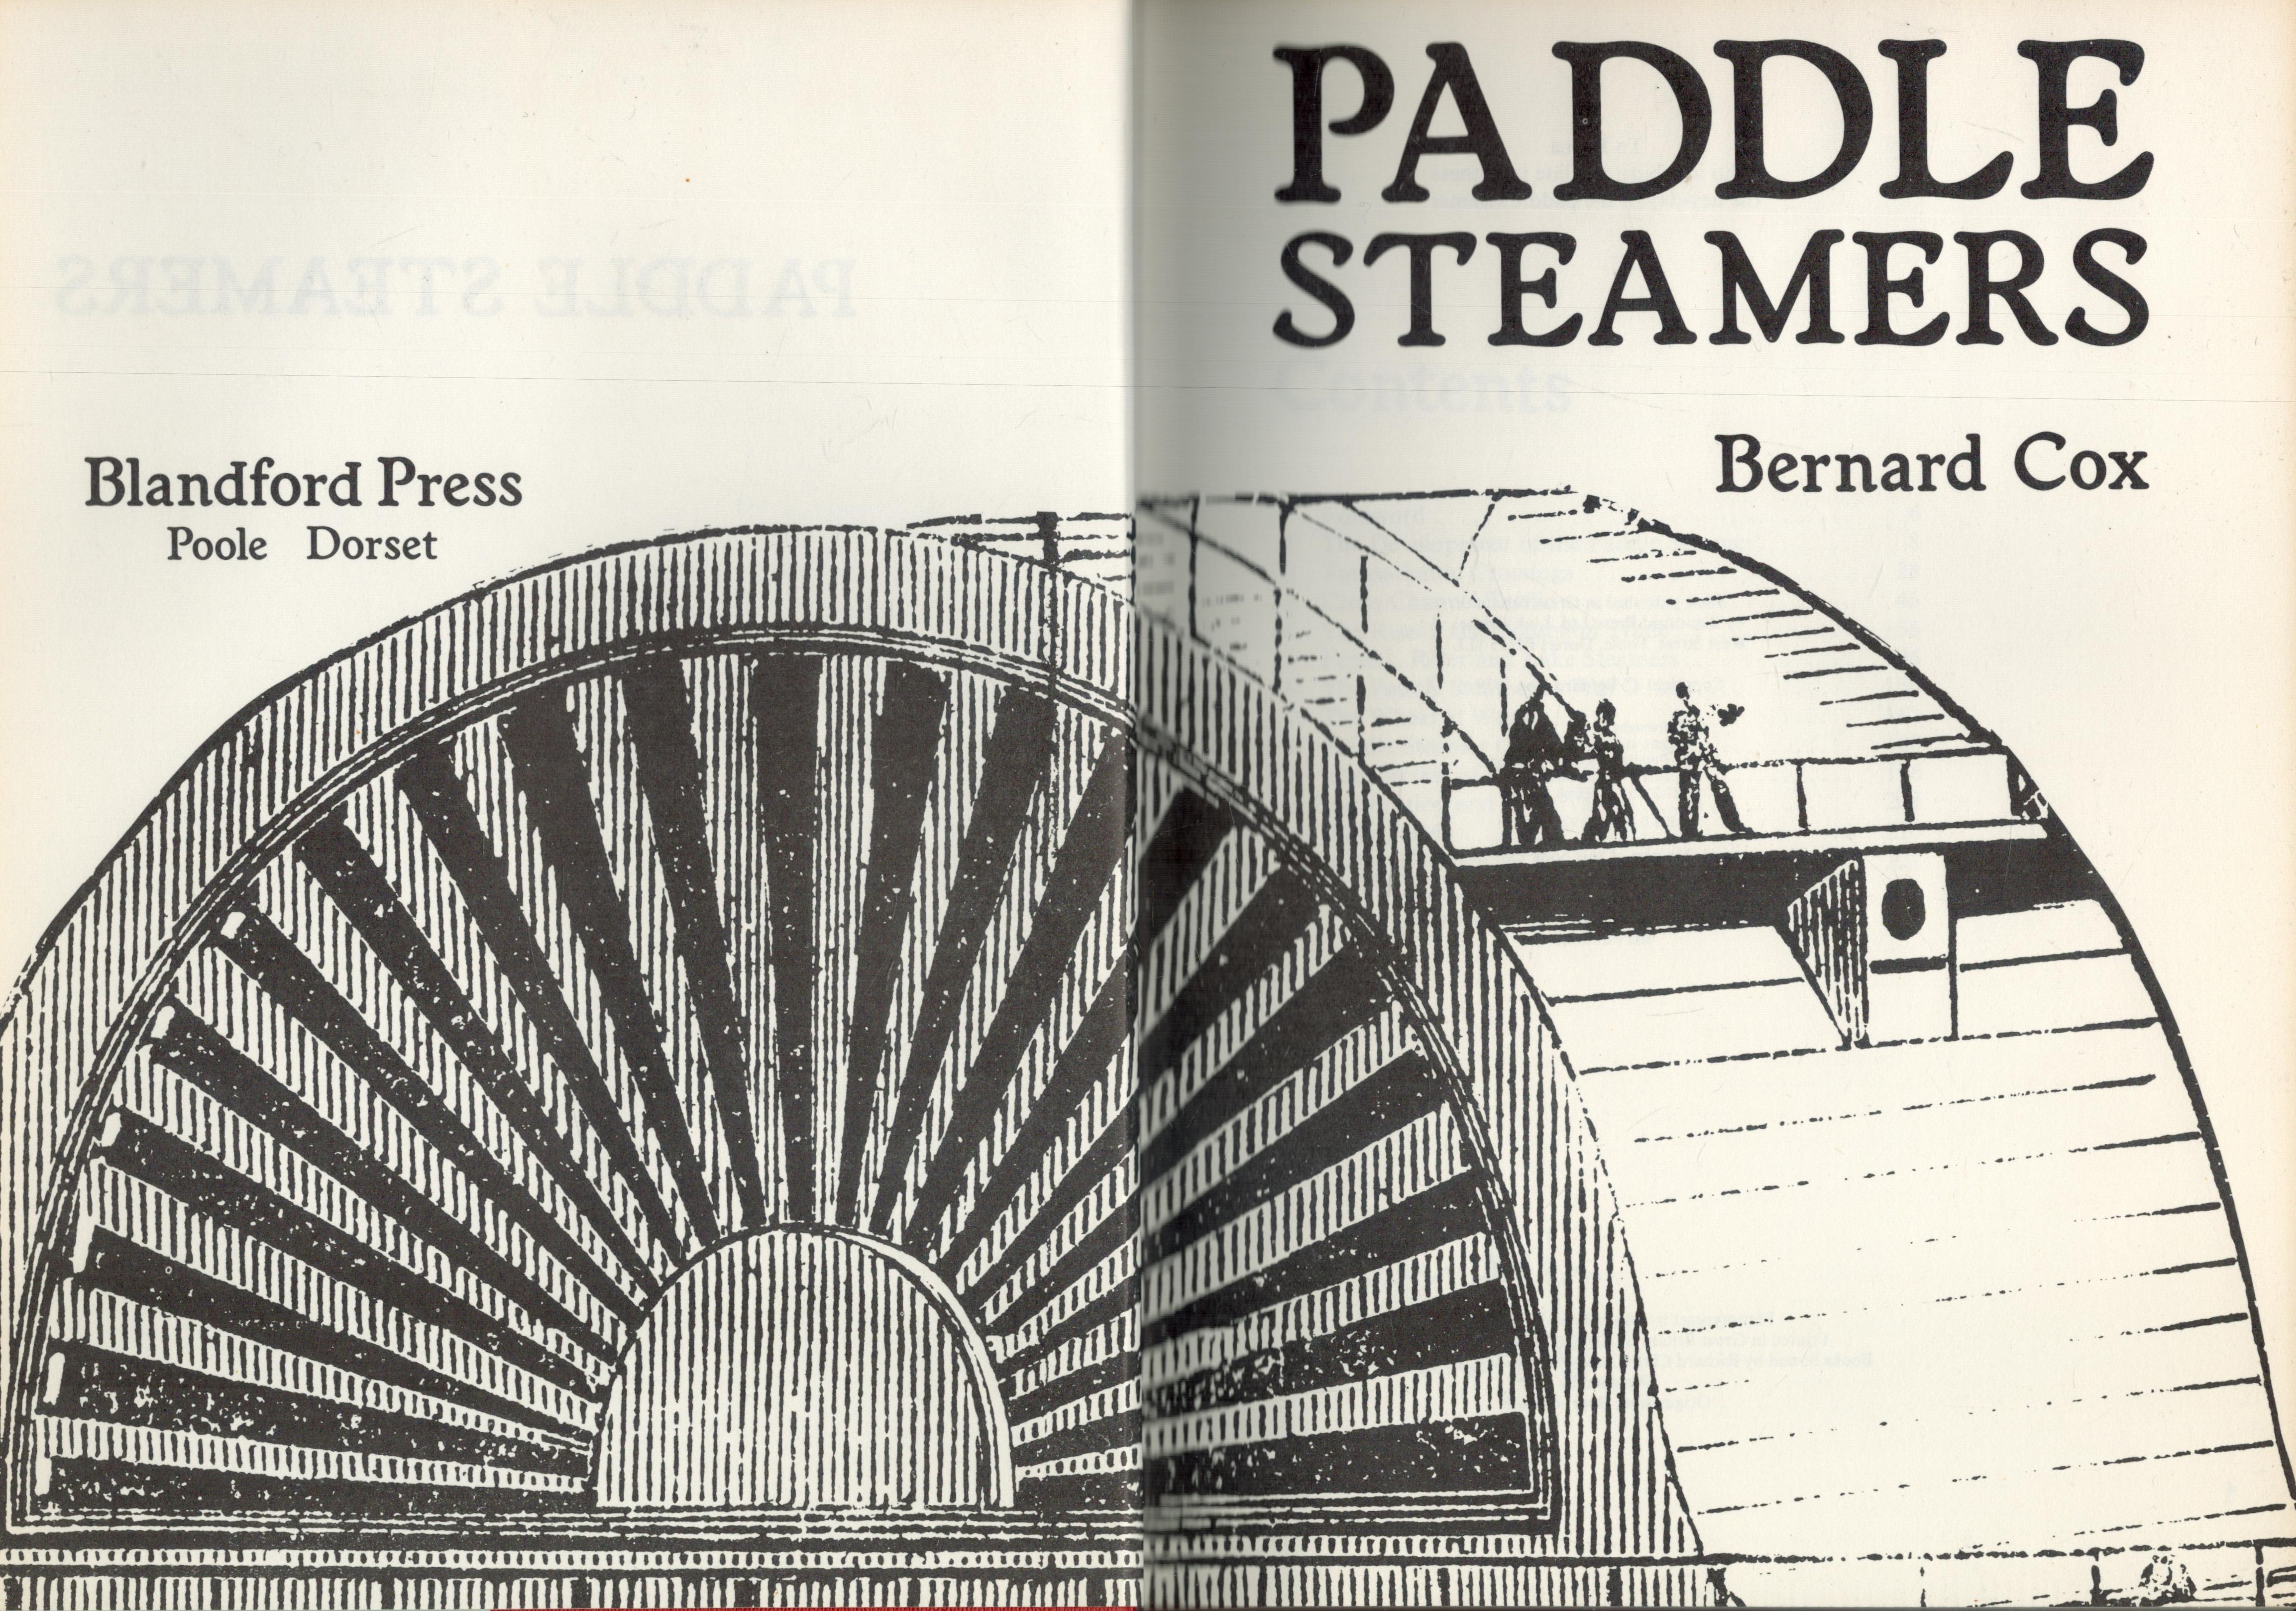 Paddle Steamers by Bernard Cox 1979 hardback book with 223 pages, slight signs of ageing fading, - Image 2 of 3